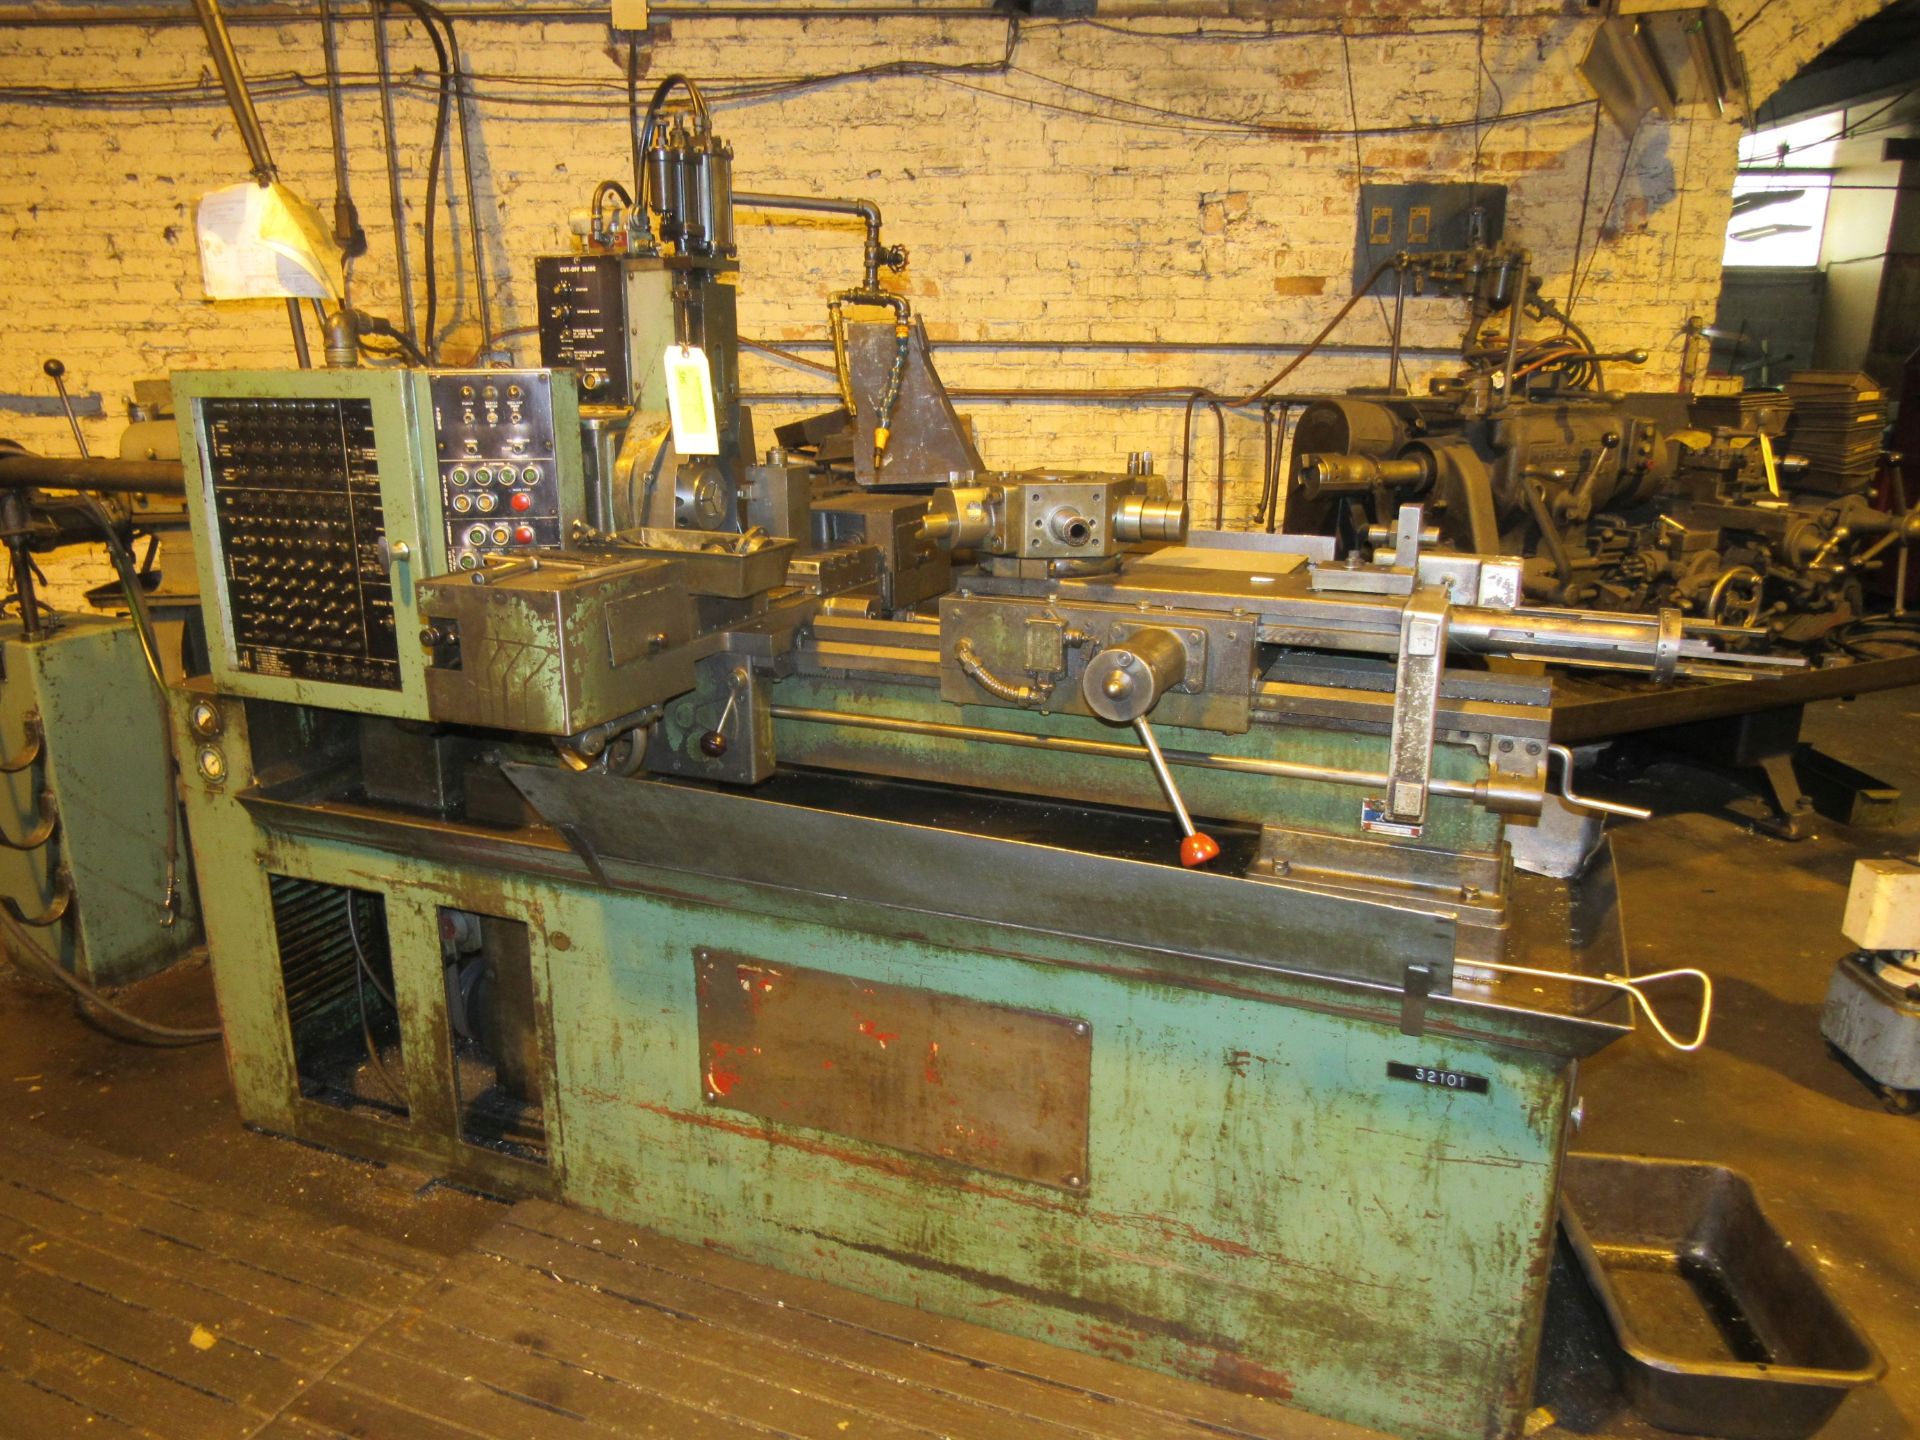 Logan model 450 collet lathe, 15" swing, 4' bed, tool post, tool turret, collet closing chuck